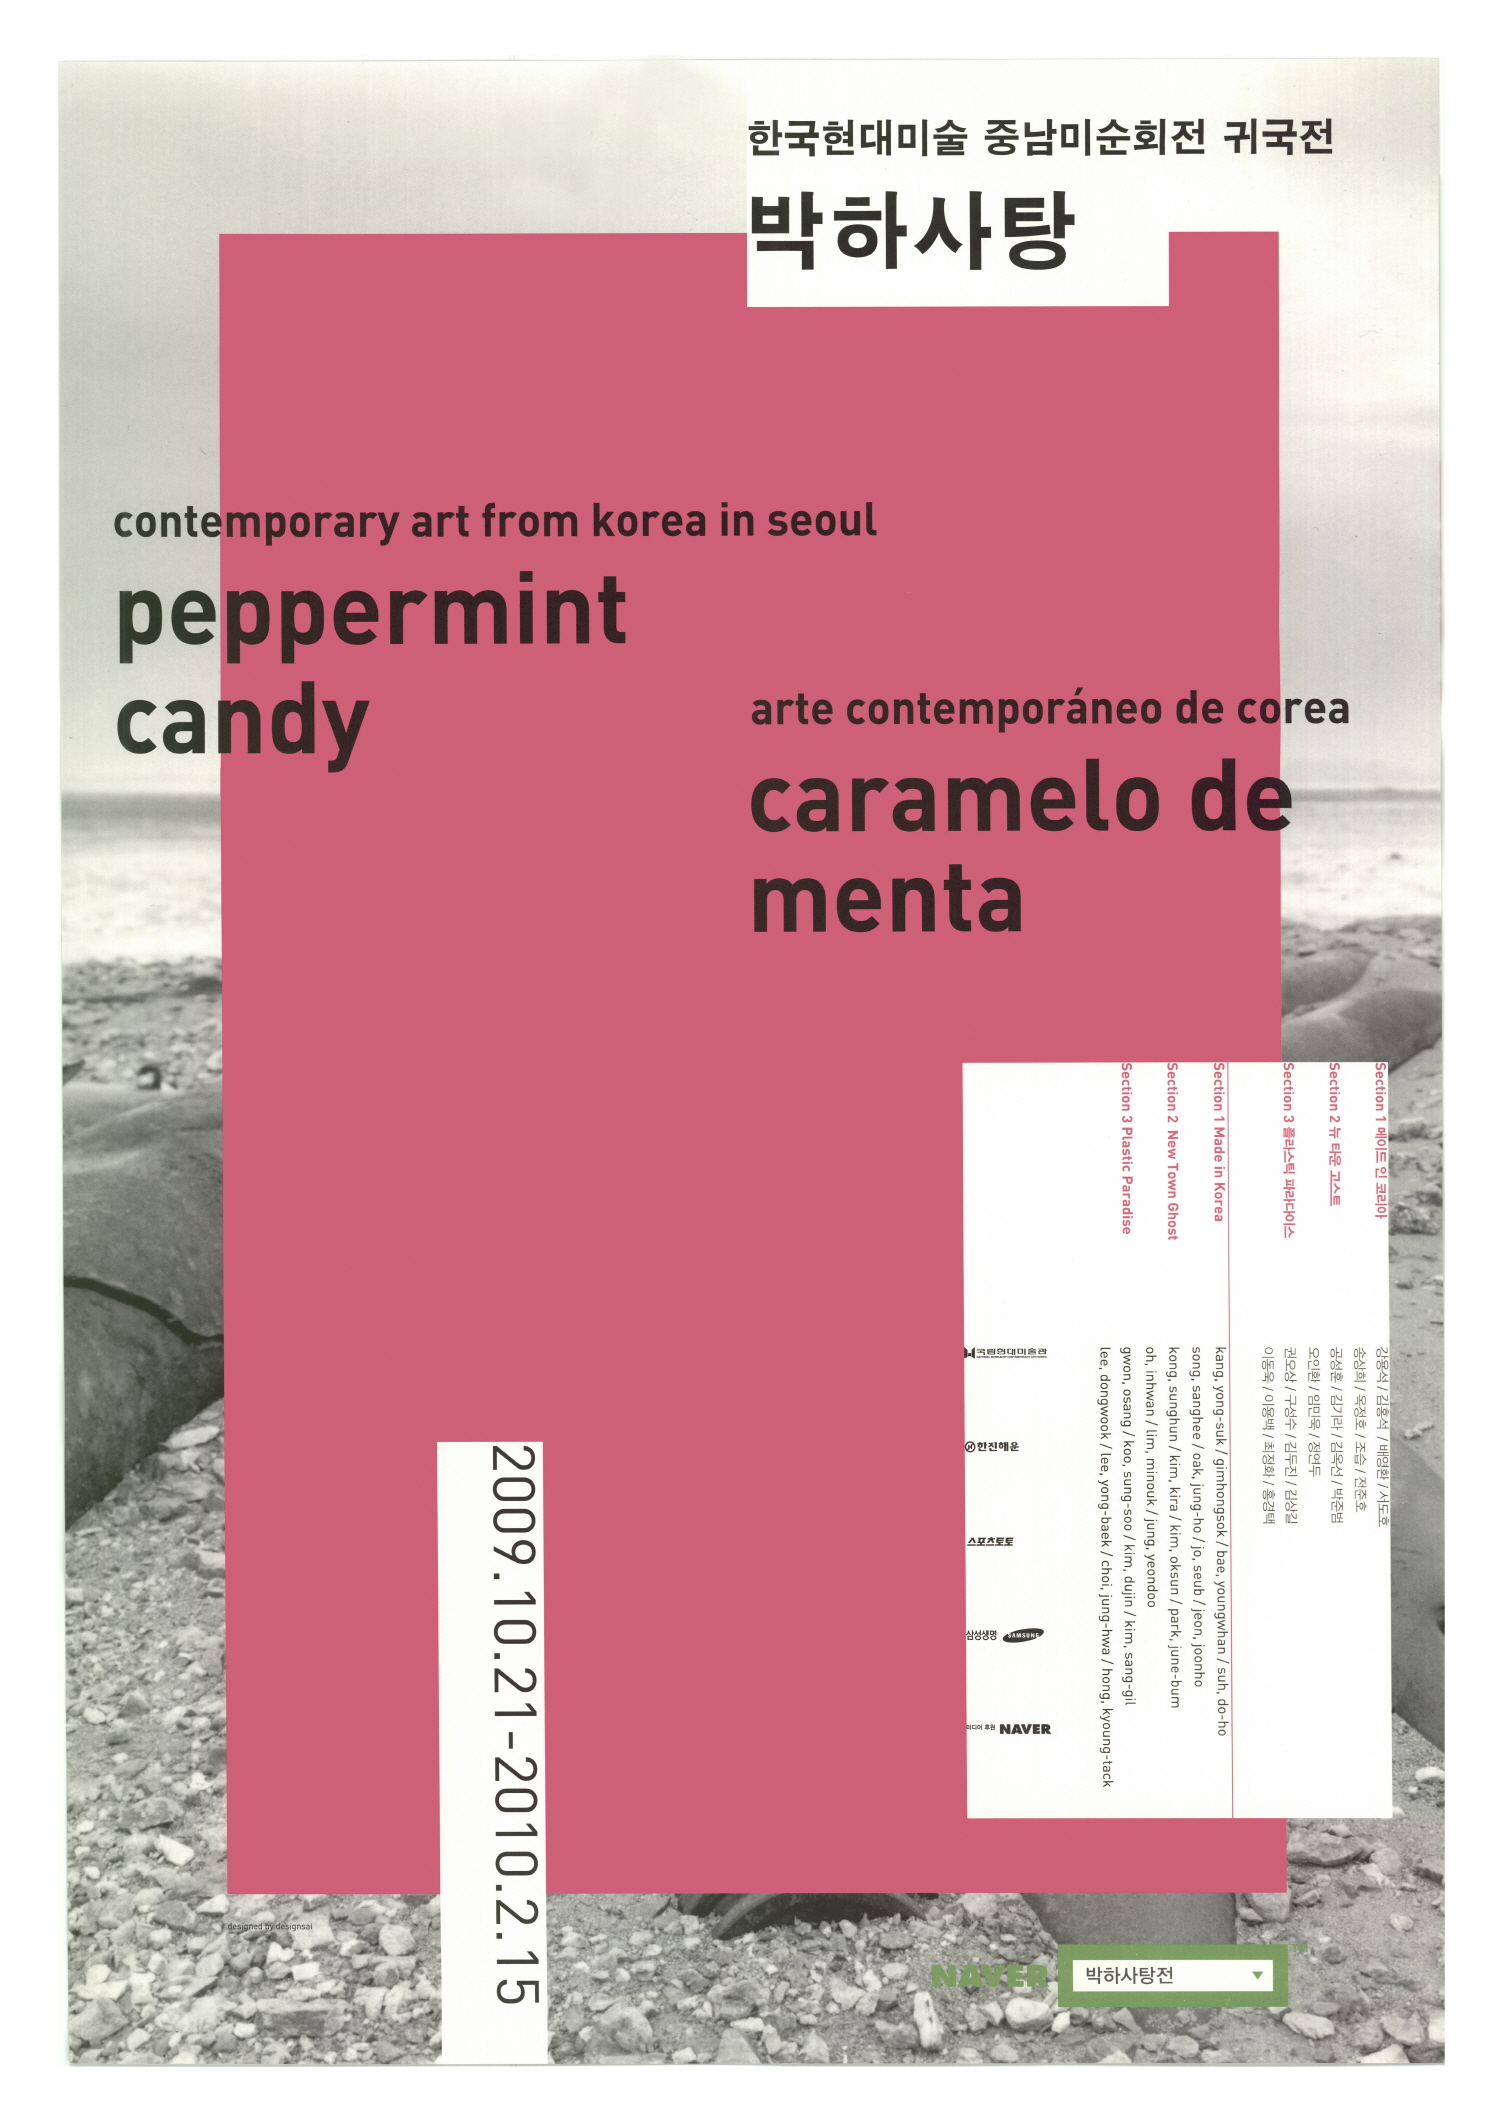 Peppermint Candy: Homecoming Exhibition of Korean Contemporary Art Touring Central and South America